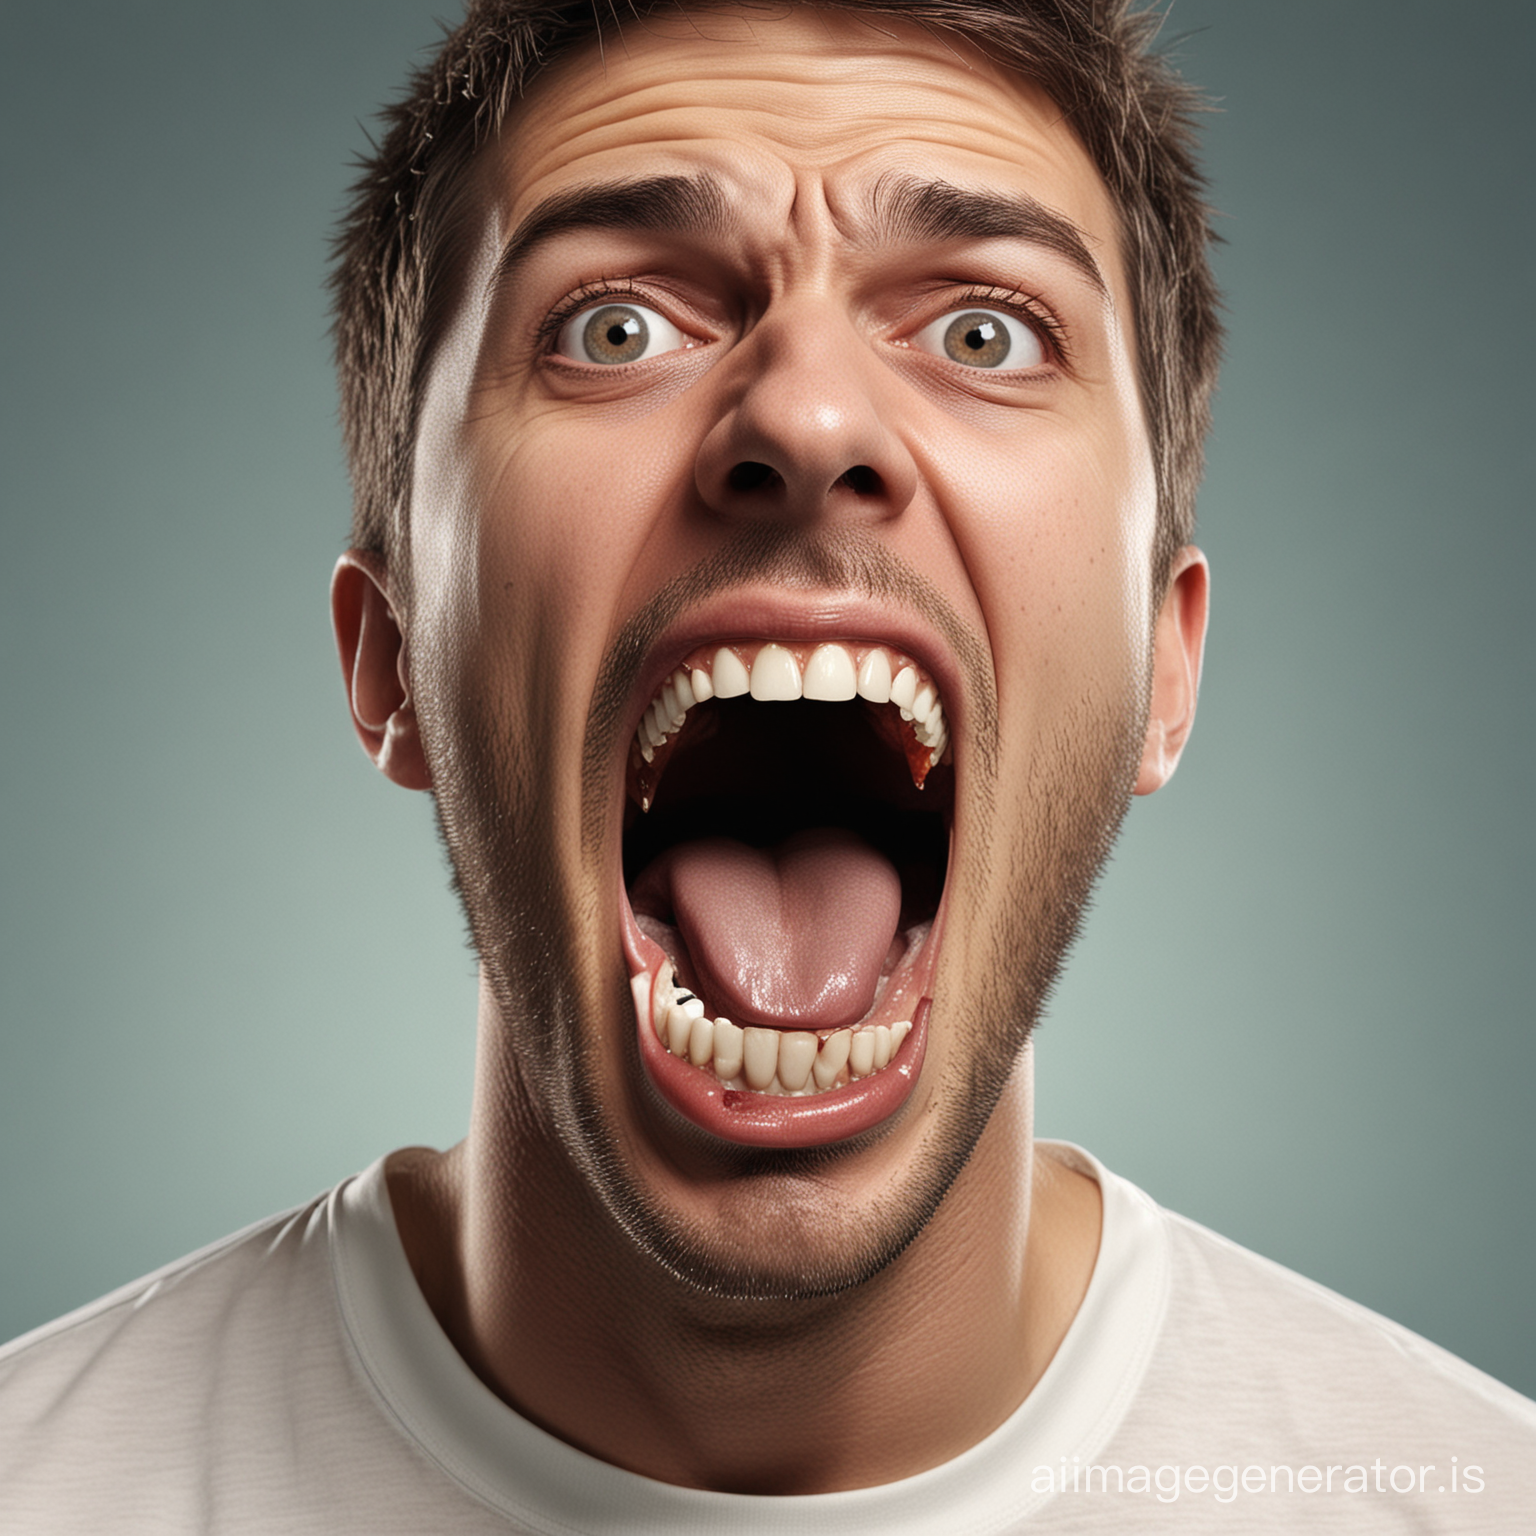 create a 3d image illustration of a man's shocked face losing his rotten teeth